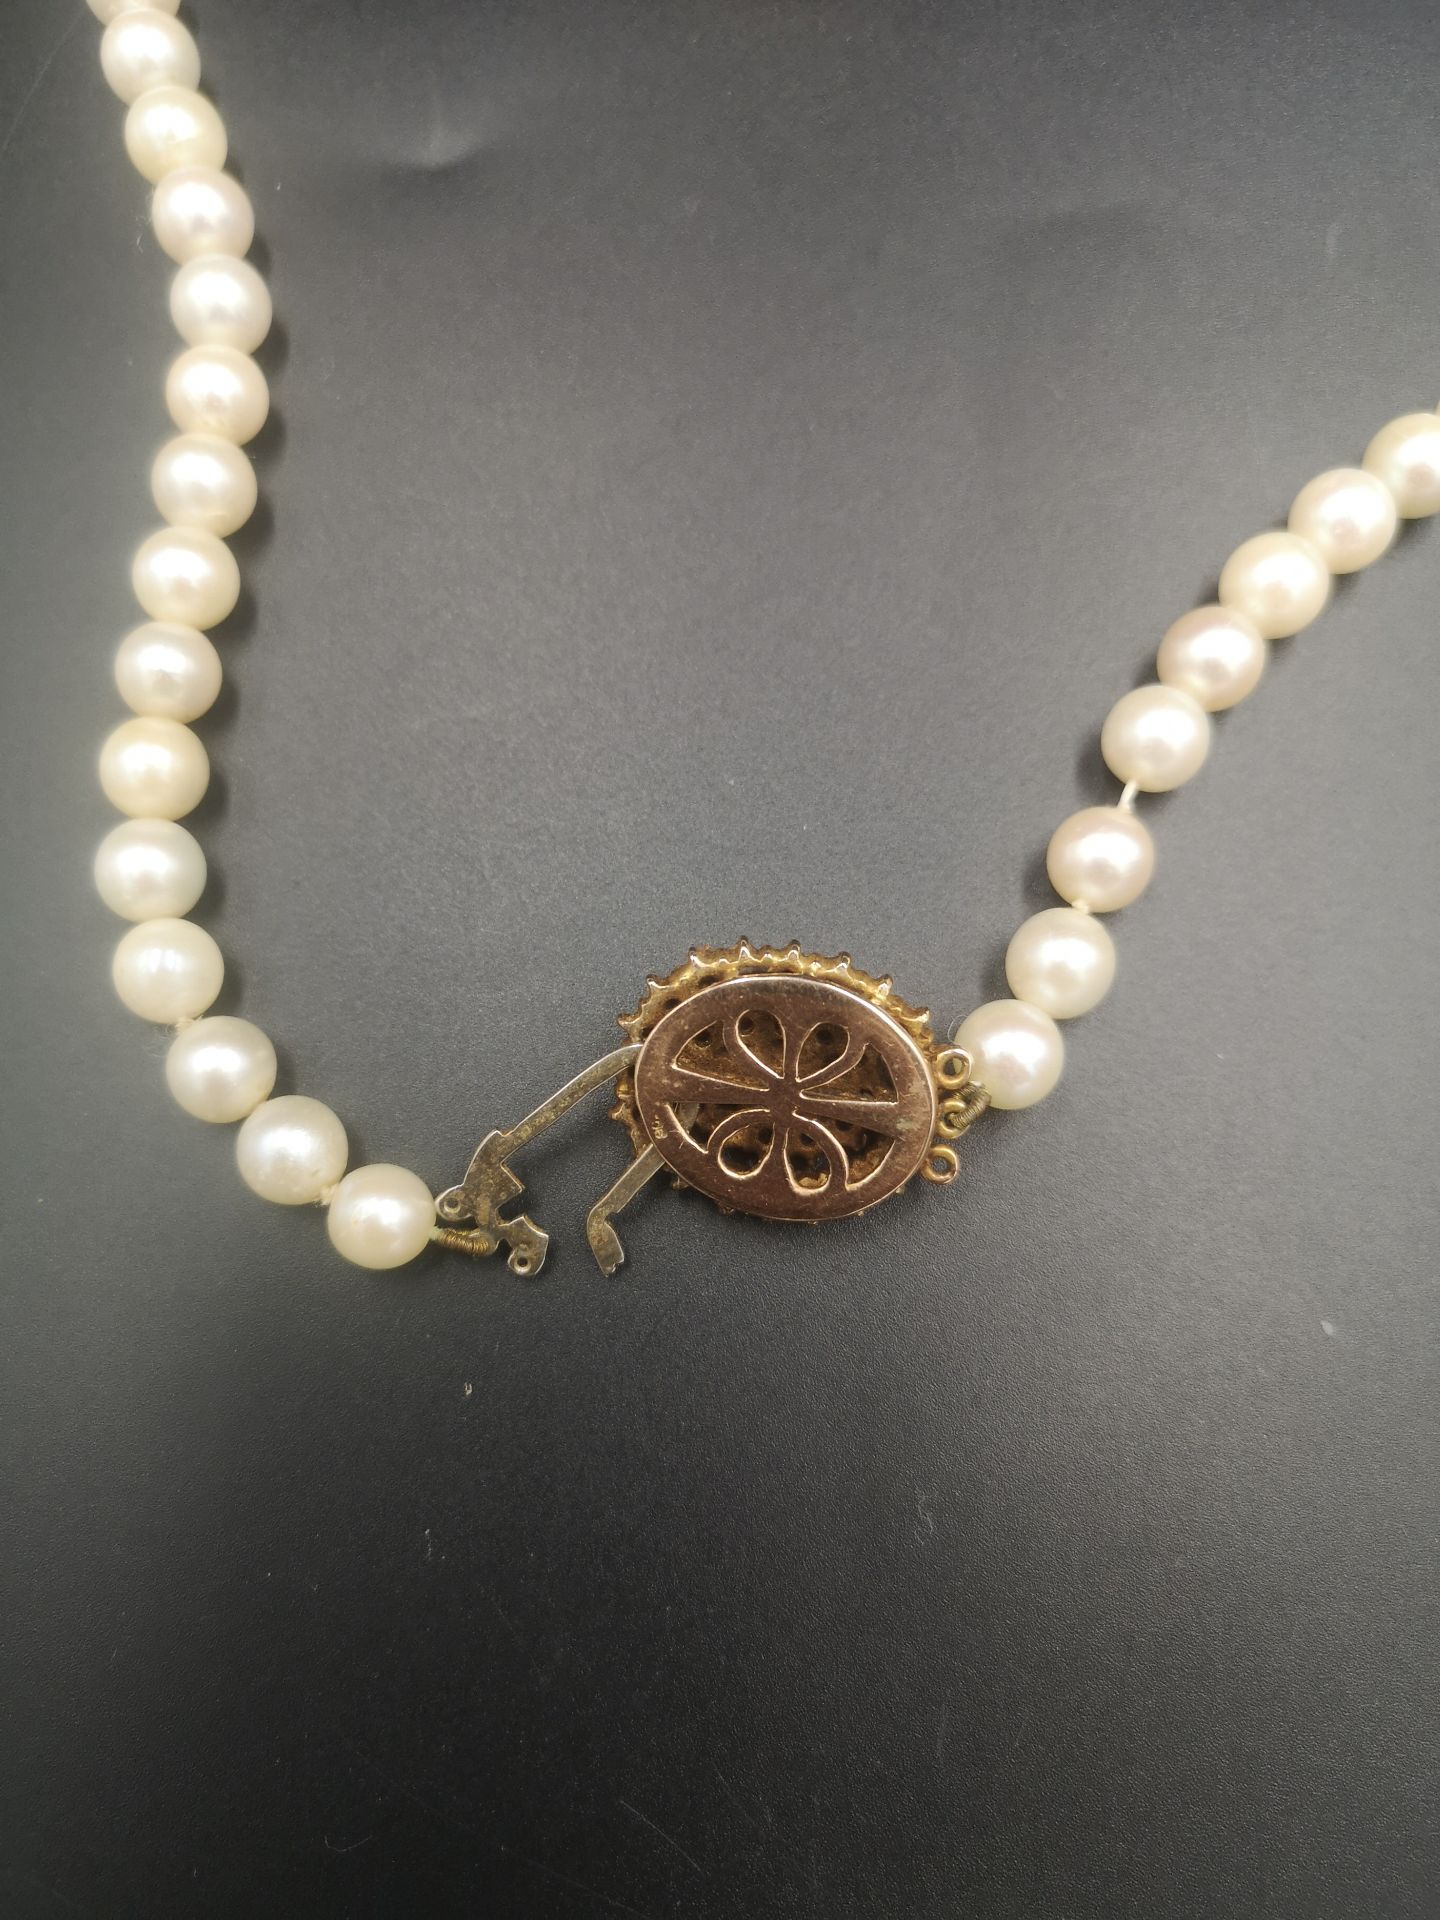 Cameo brooch together with a pearl necklace - Image 4 of 5